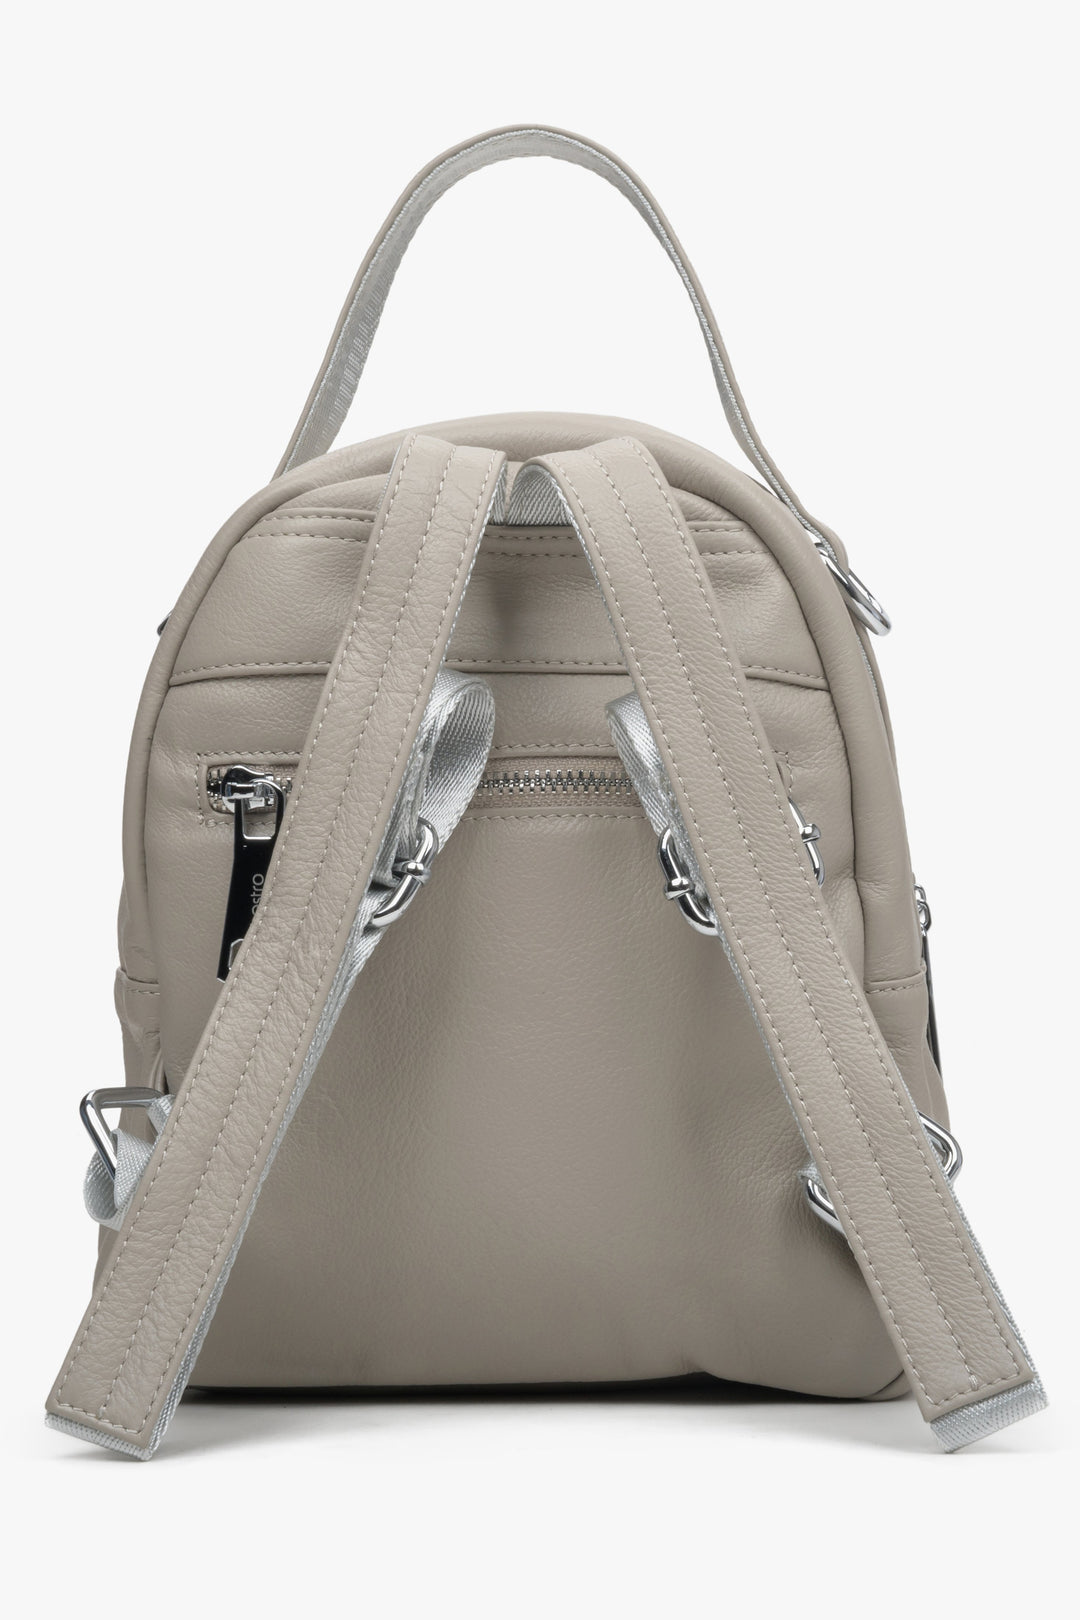 Urban, women's beige backpack by Estro made of genuine leather - close-up of the back of the model.